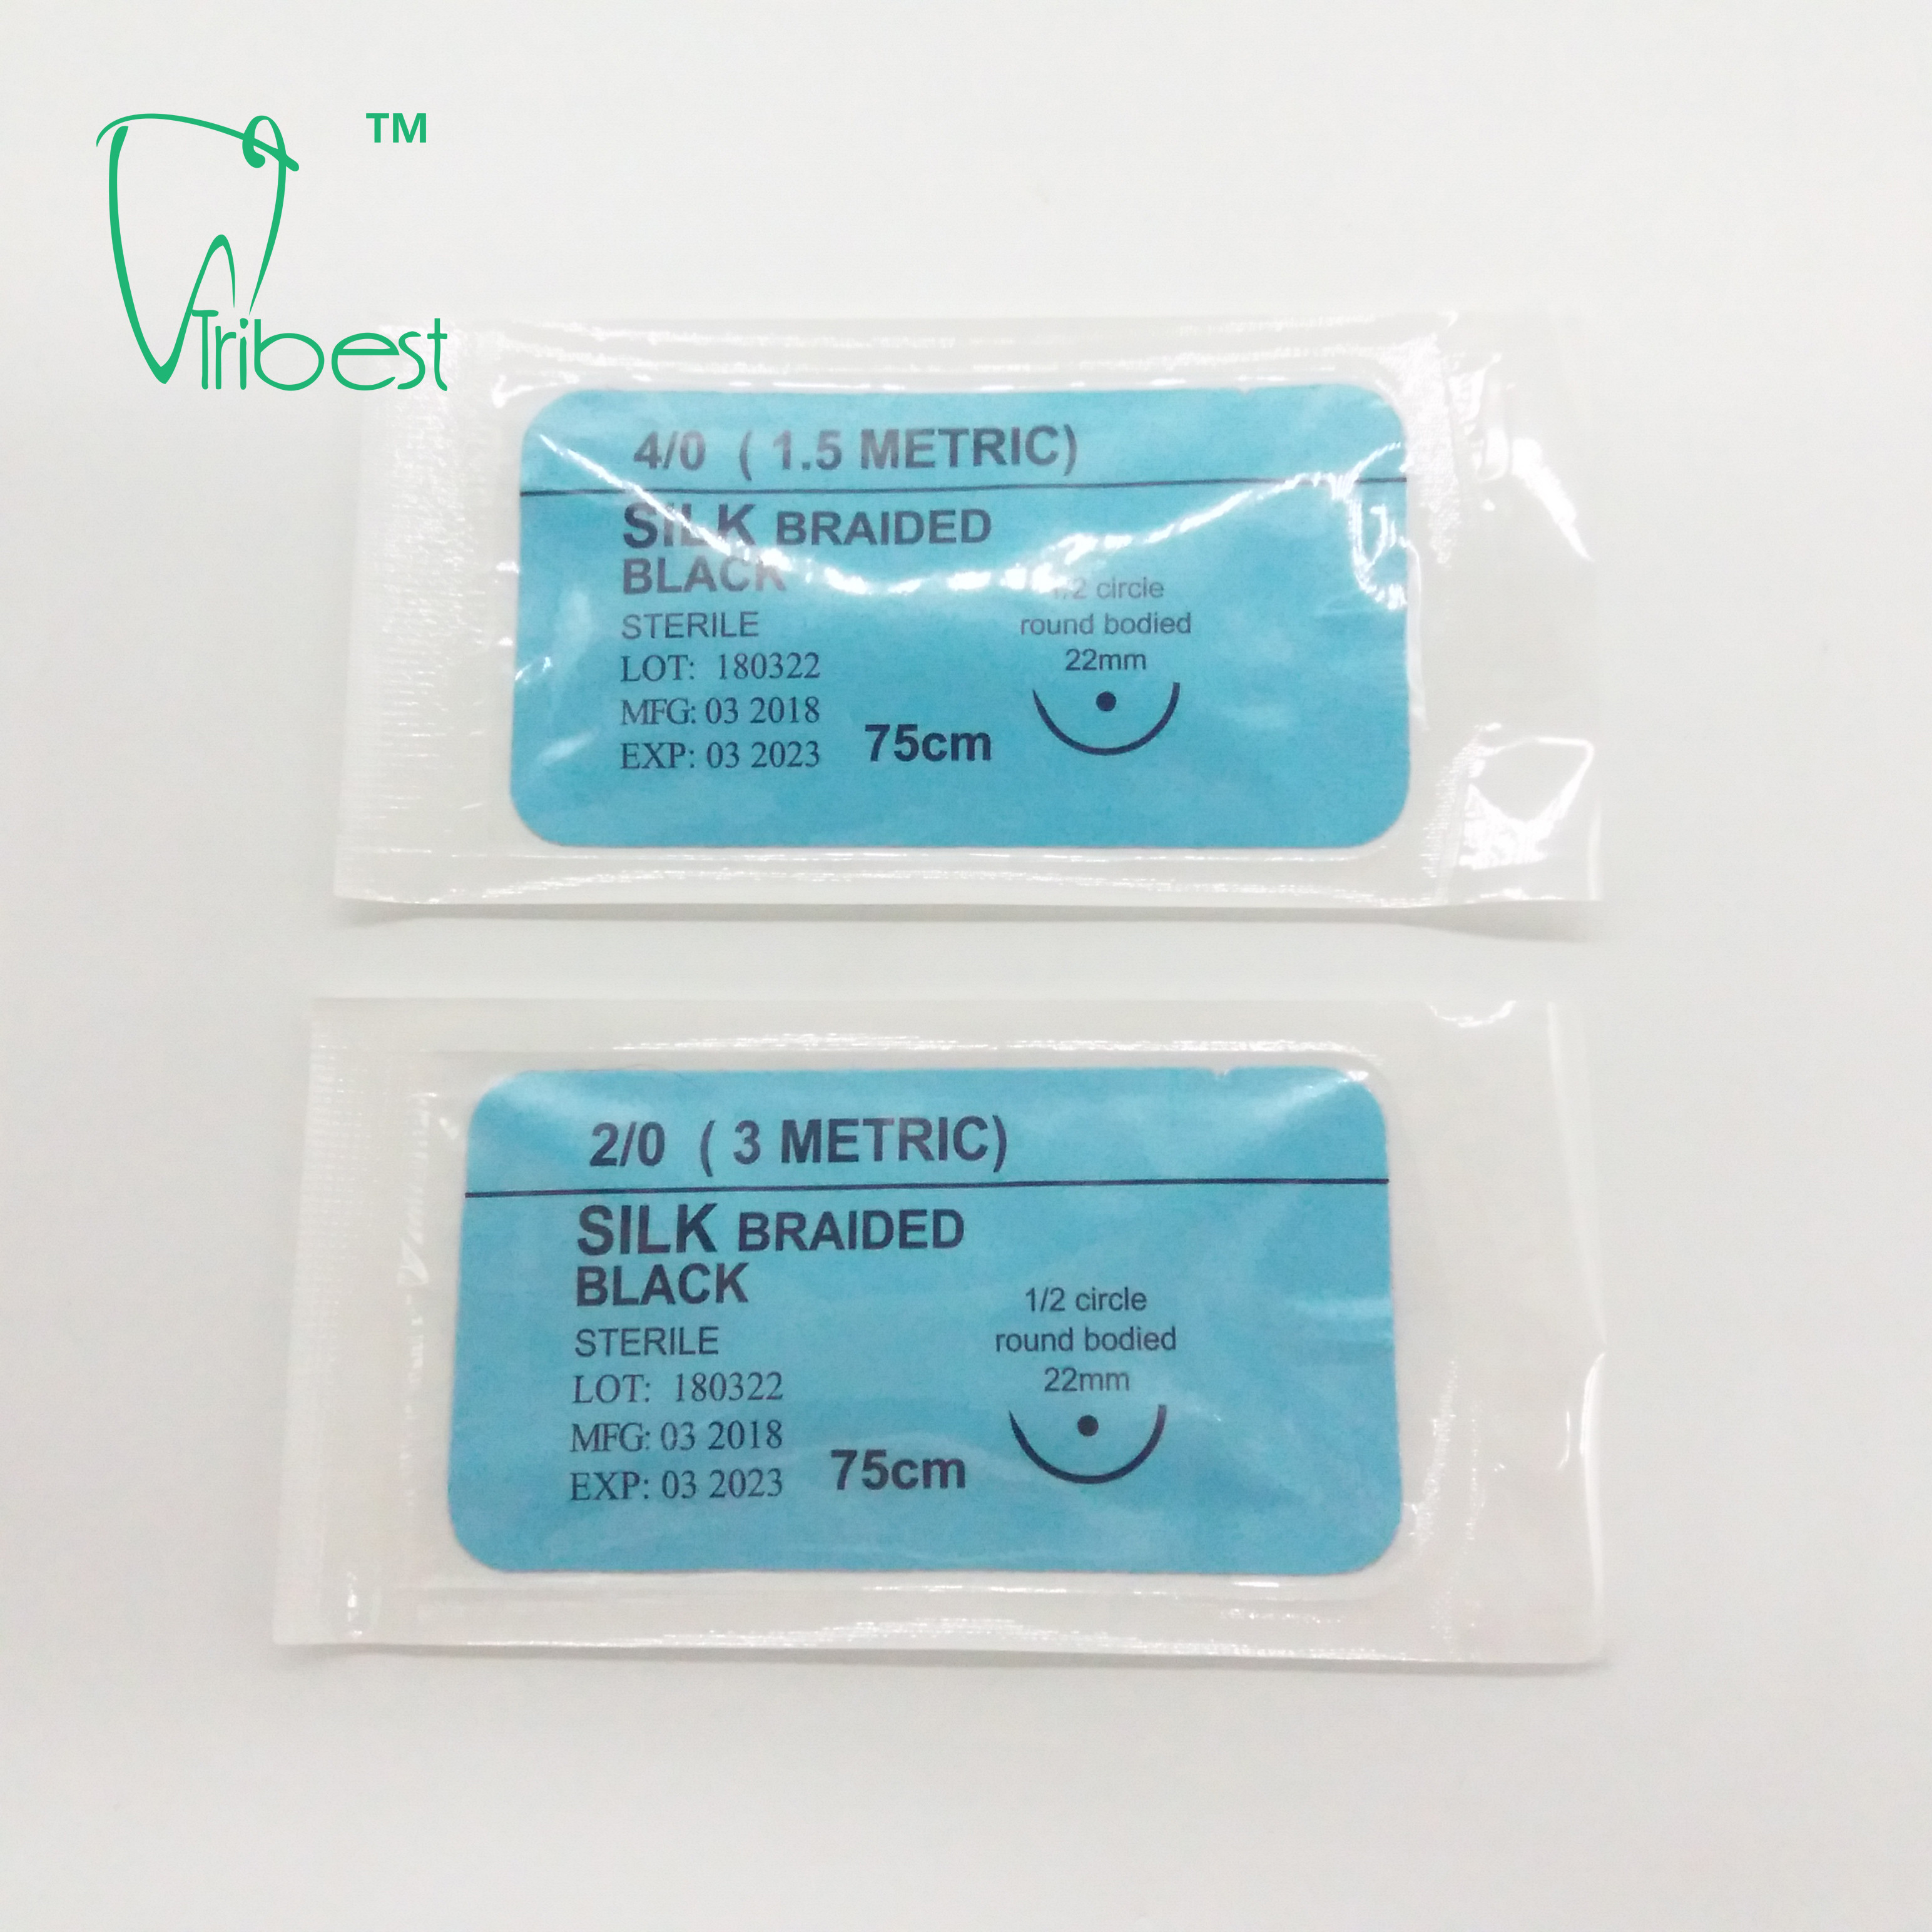 Wholesale Medical Sterile Absorbable Dental Surgical Sutures from china suppliers